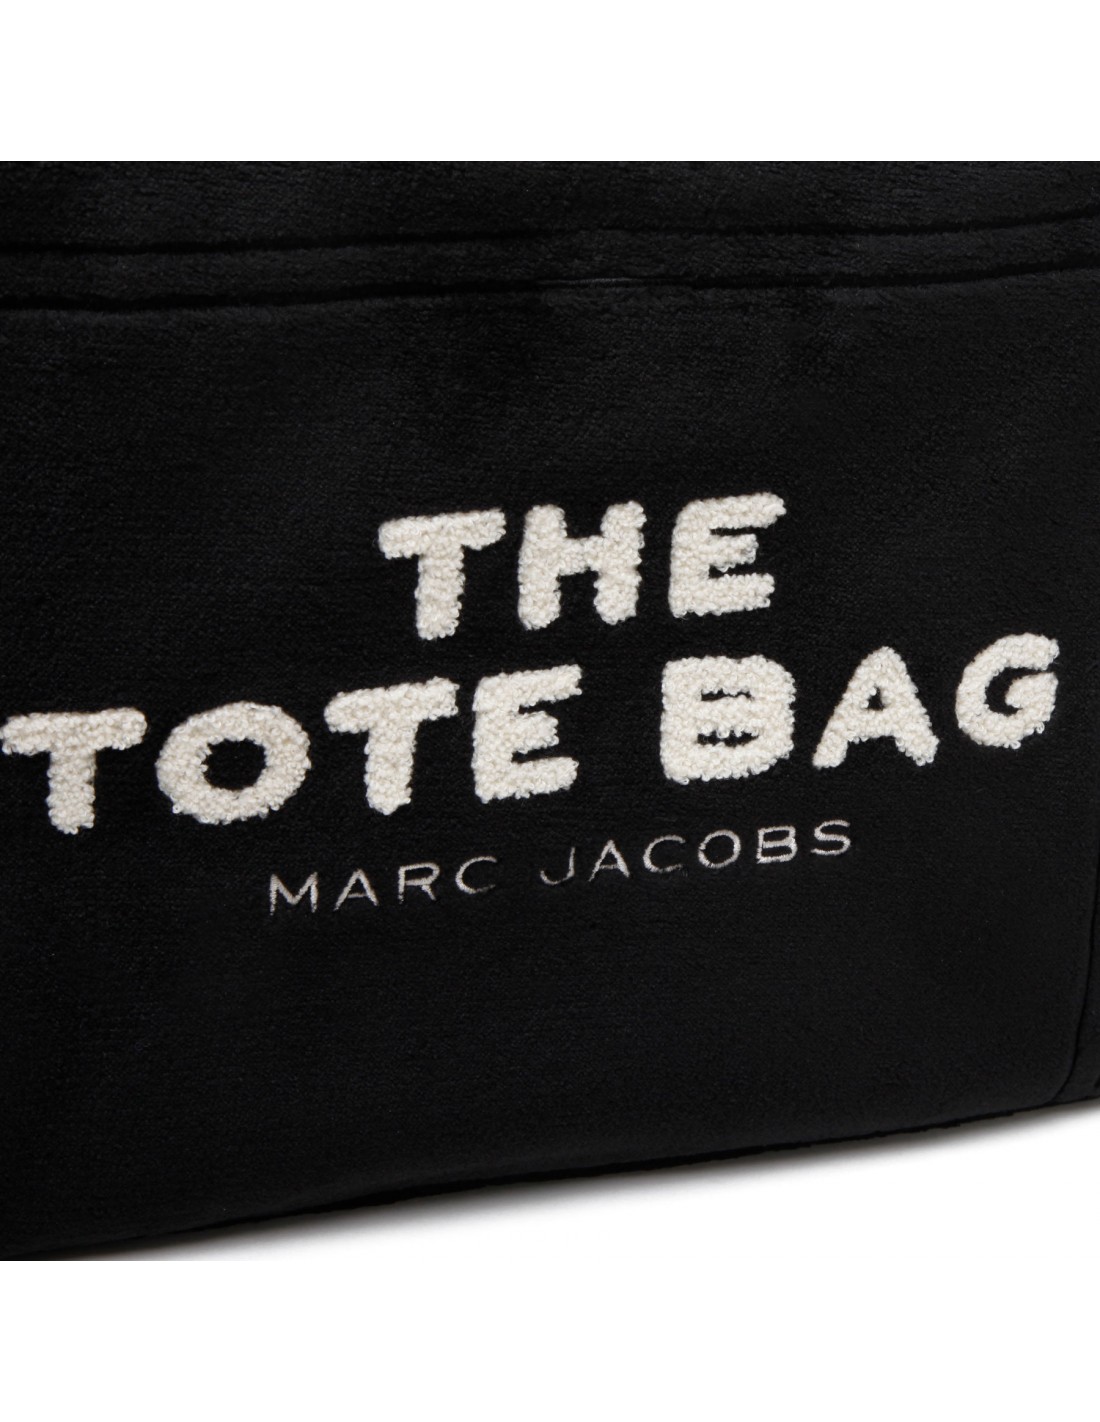 Marc Jacobs The Medium Terry Tote Bag